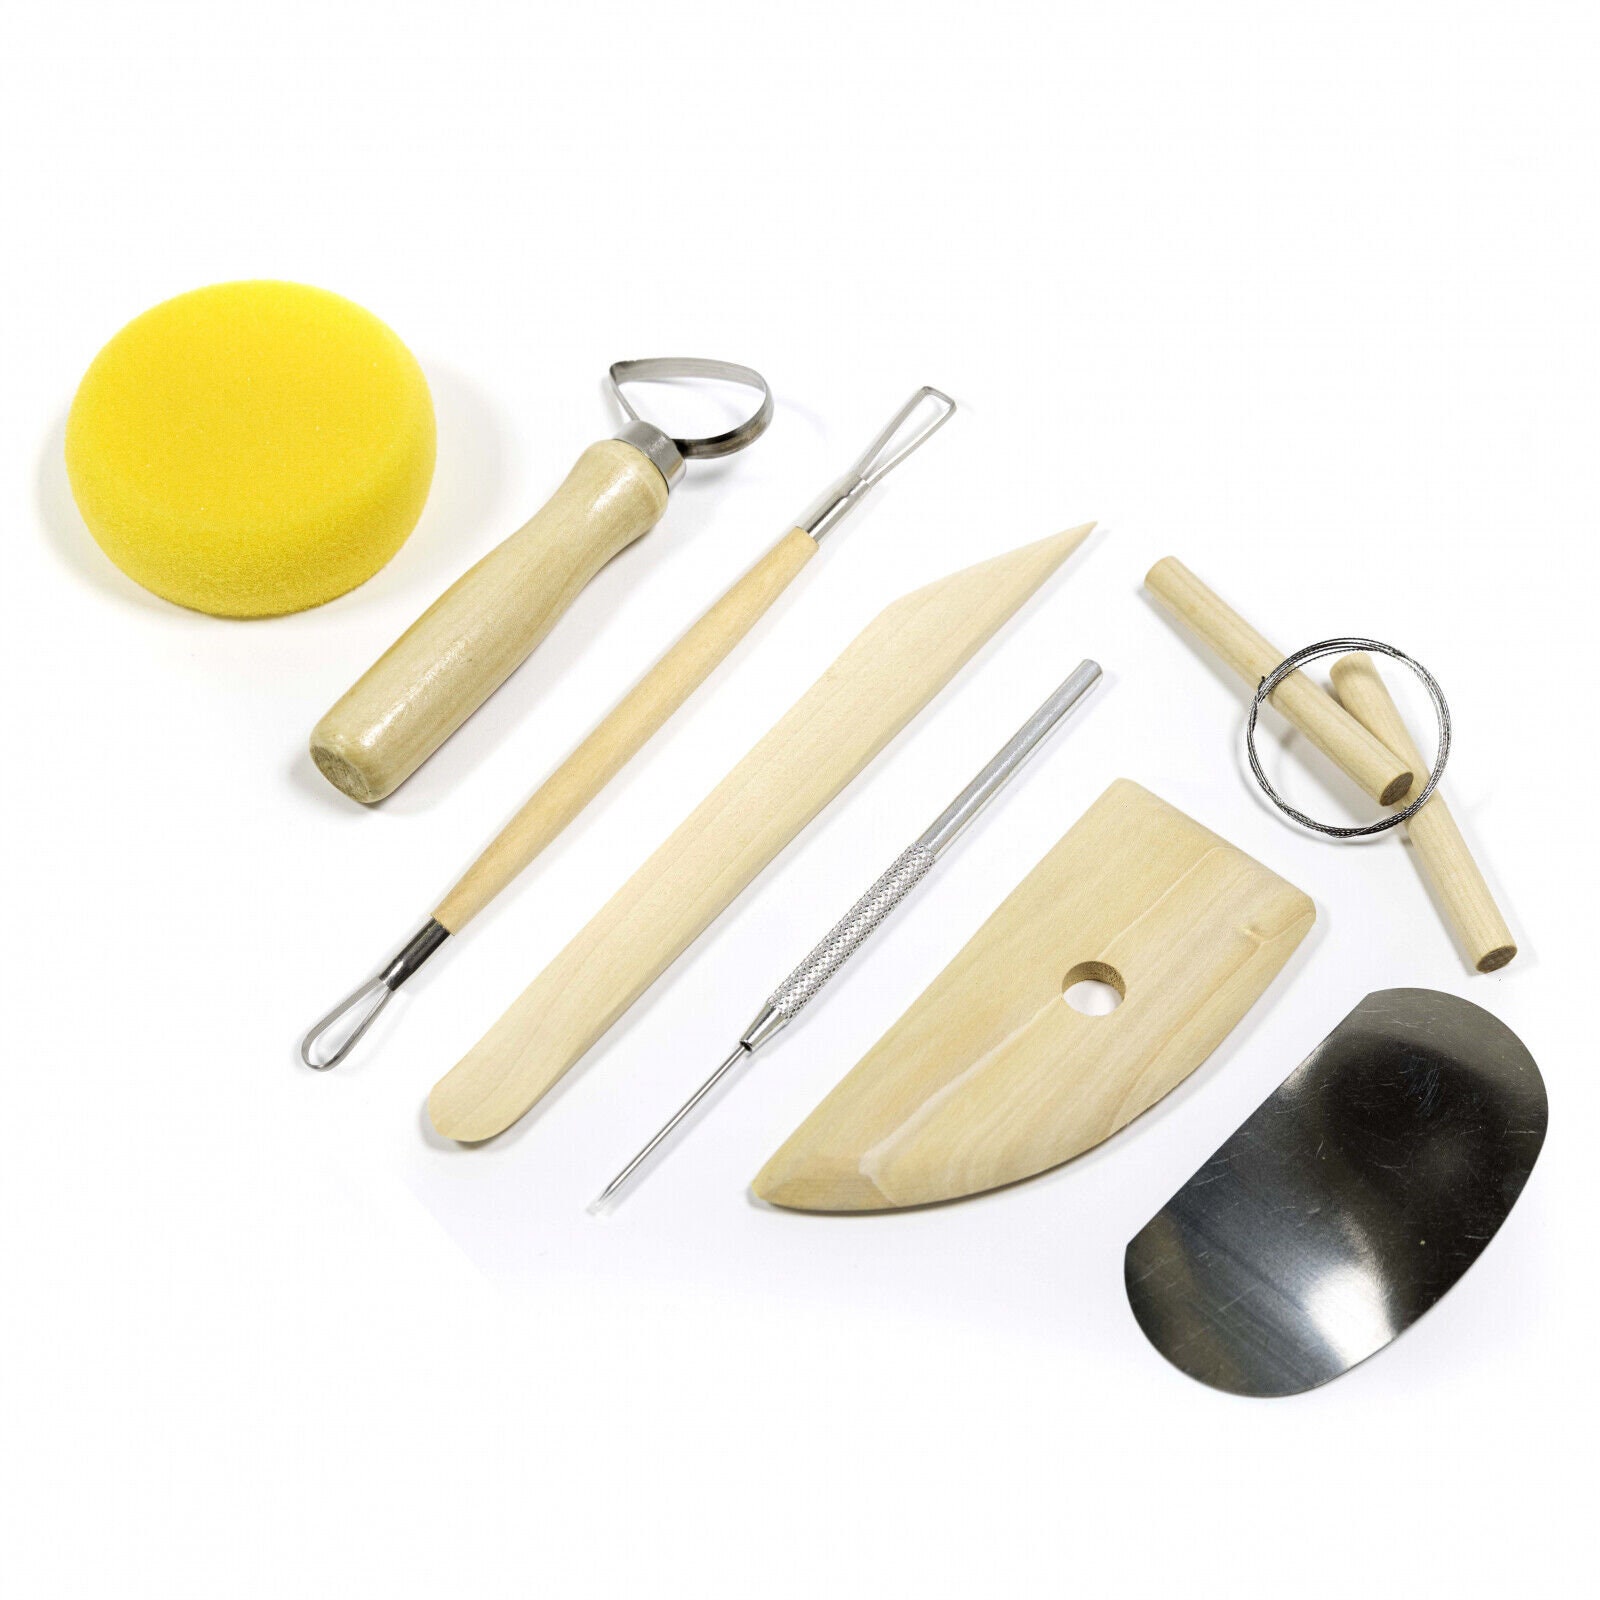 Reusable Diy Pottery Tool Kit Home Handwork Clay Sculpture Ceramics Molding  Sketching Tools Kit P1130 From Puppyhome, $3.02